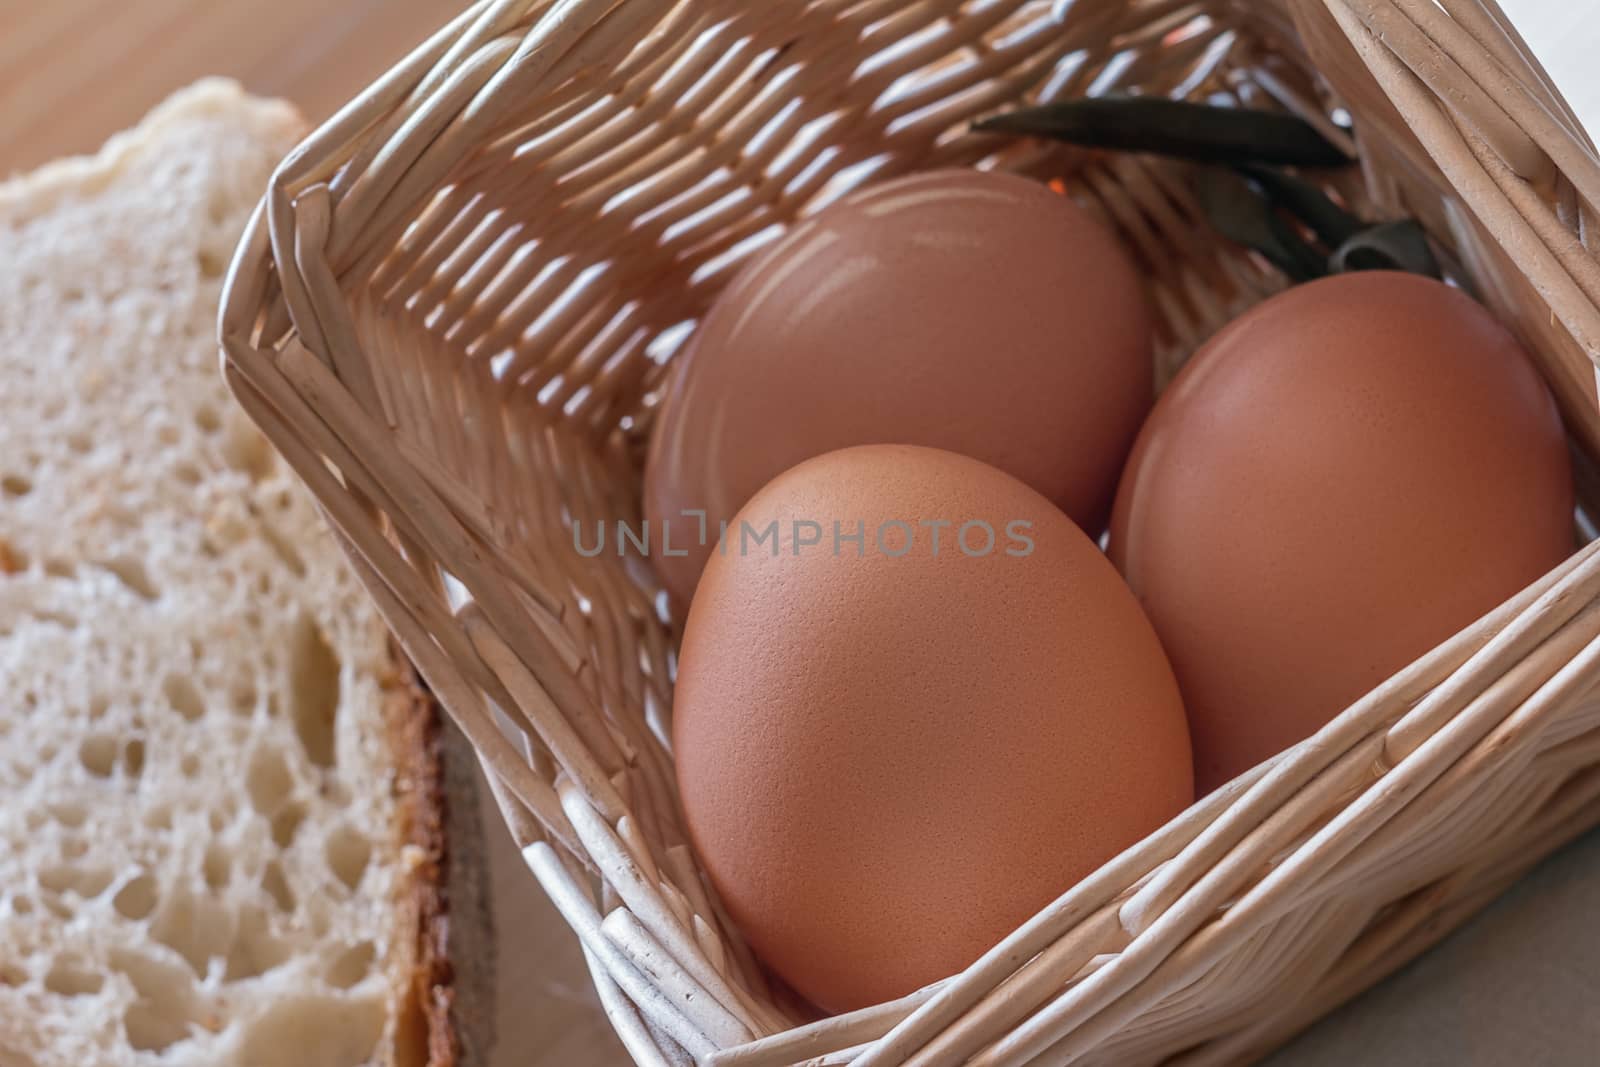 photograph depicting eggs in the basket and sliced bread